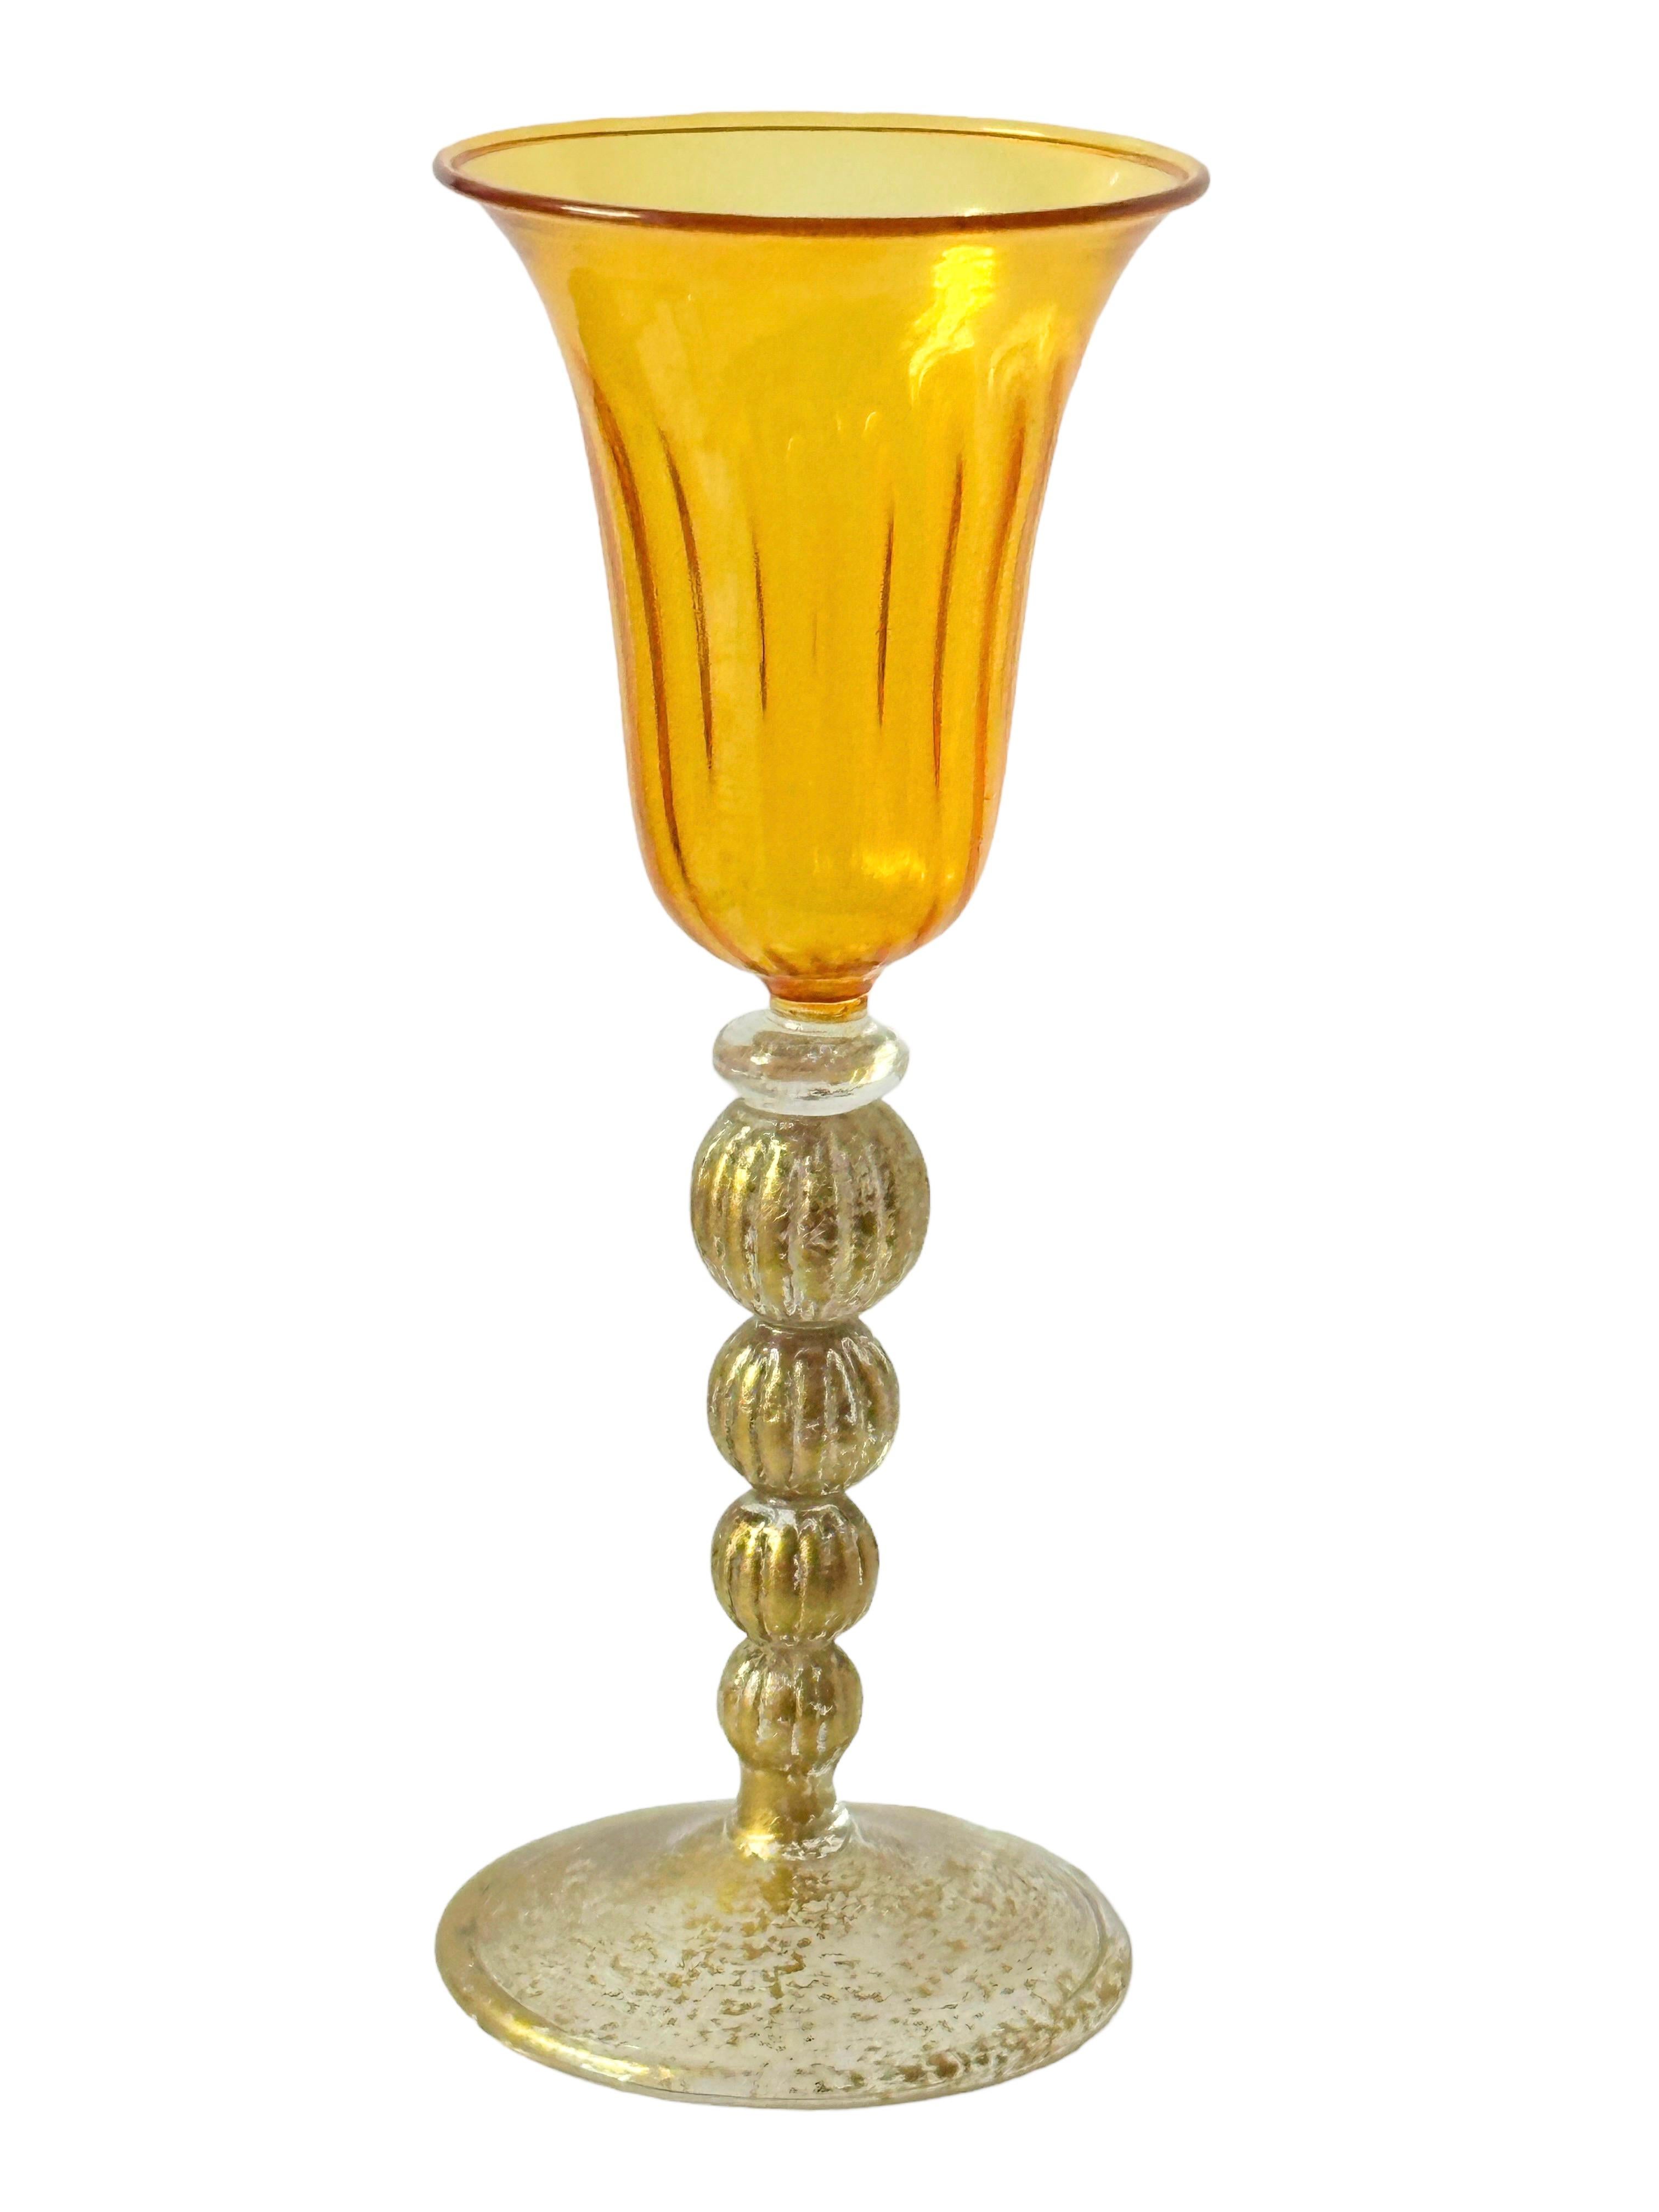 Hand-Crafted Amber & Gold Stardust Salviati Murano Glass Liqueur Goblet, Vintage Italy  For Sale